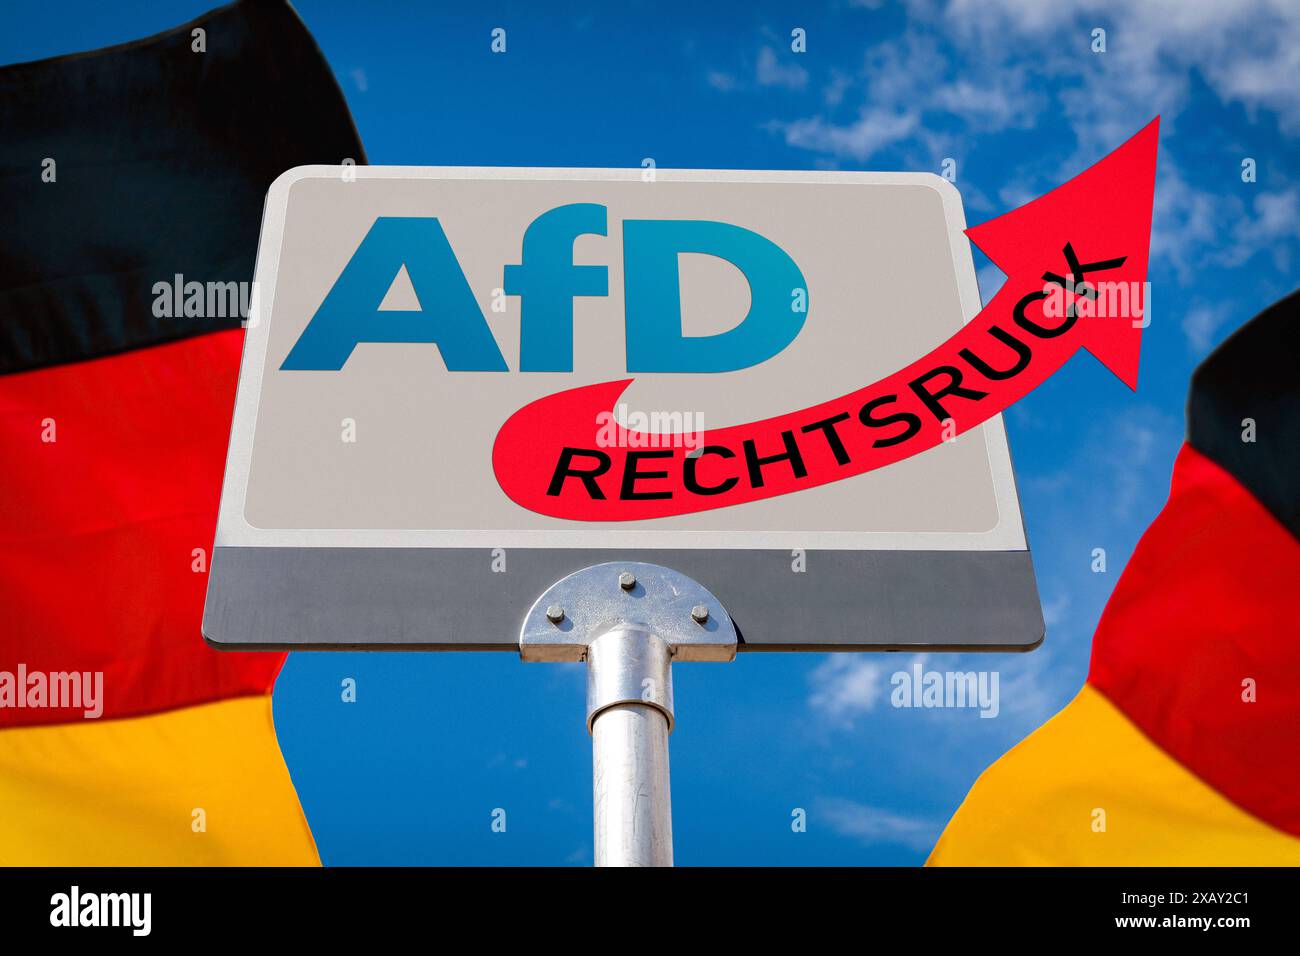 09 June 2024: Shift to the right in Germany. Concept image of the rise of the AfD - Alternative for Germany, right-wing political change in the government due to the party s increase in votes. PHOTOMONTAGE *** Rechtsruck in Deutschland. Konzeptbild zum Aufstieg der AfD - Alternative für Deutschland, rechte politische Veränderung der Regierung durch den Zuwachs an Stimmen der Partei. FOTOMONTAGE Stock Photo